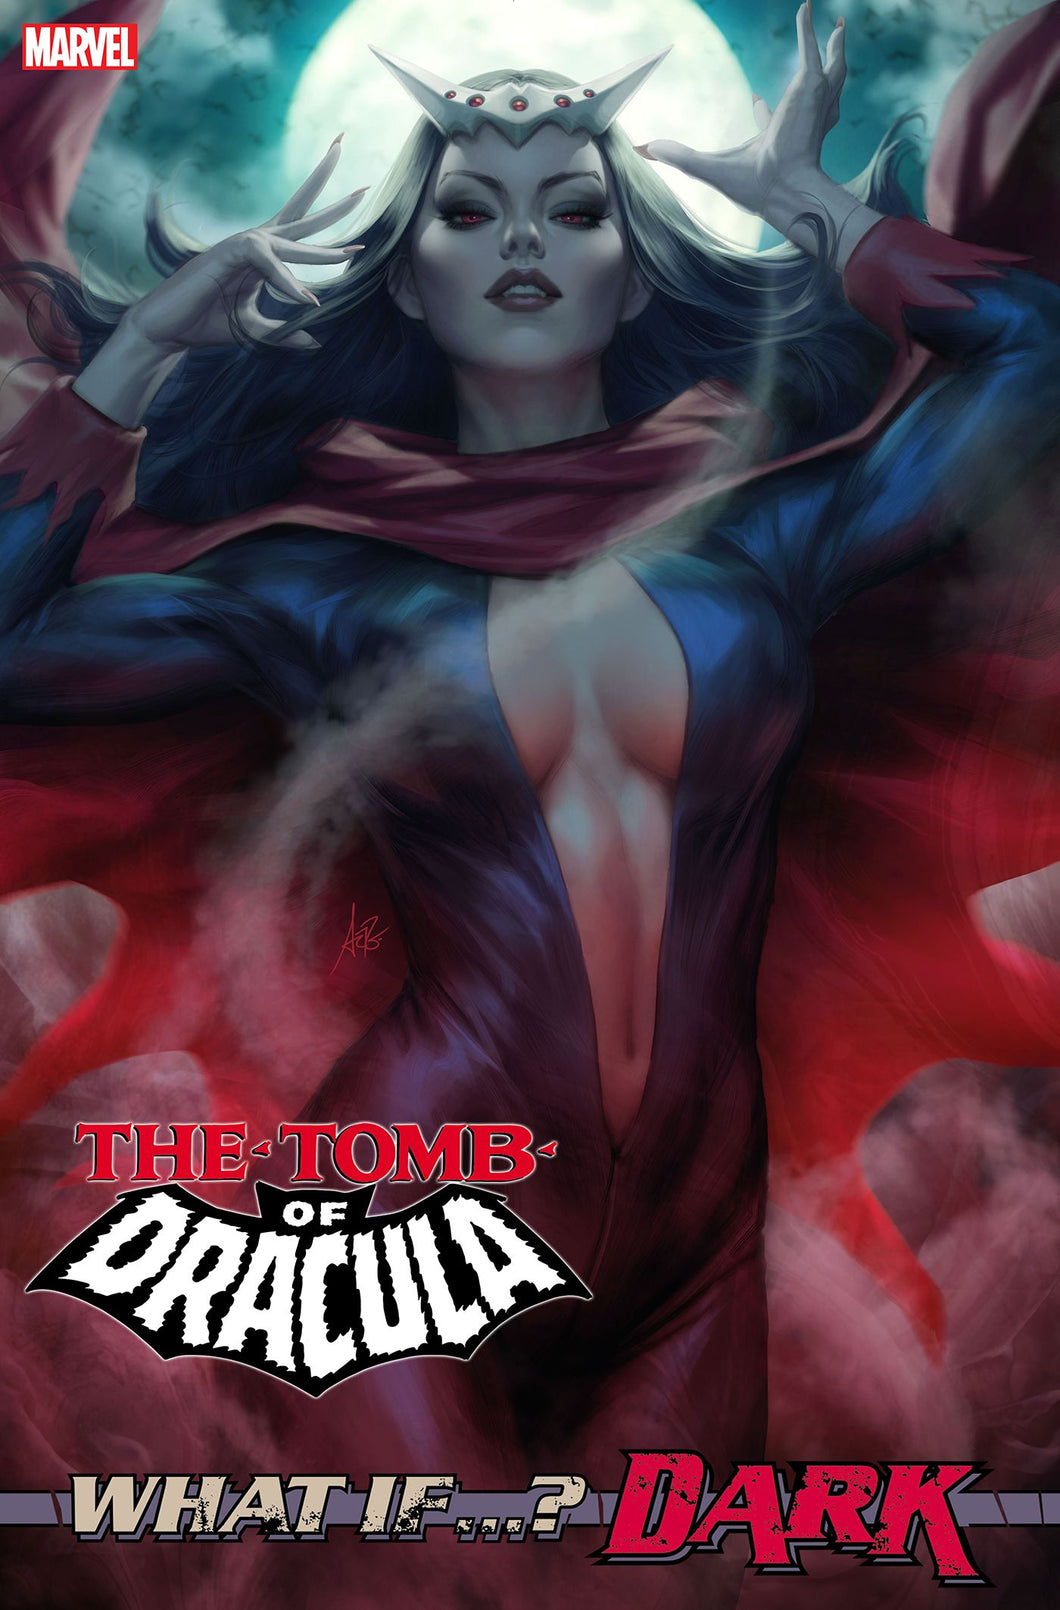 WHAT IF...? DARK: TOMB OF DRACULA #1 (ARTGERM VARIANT)